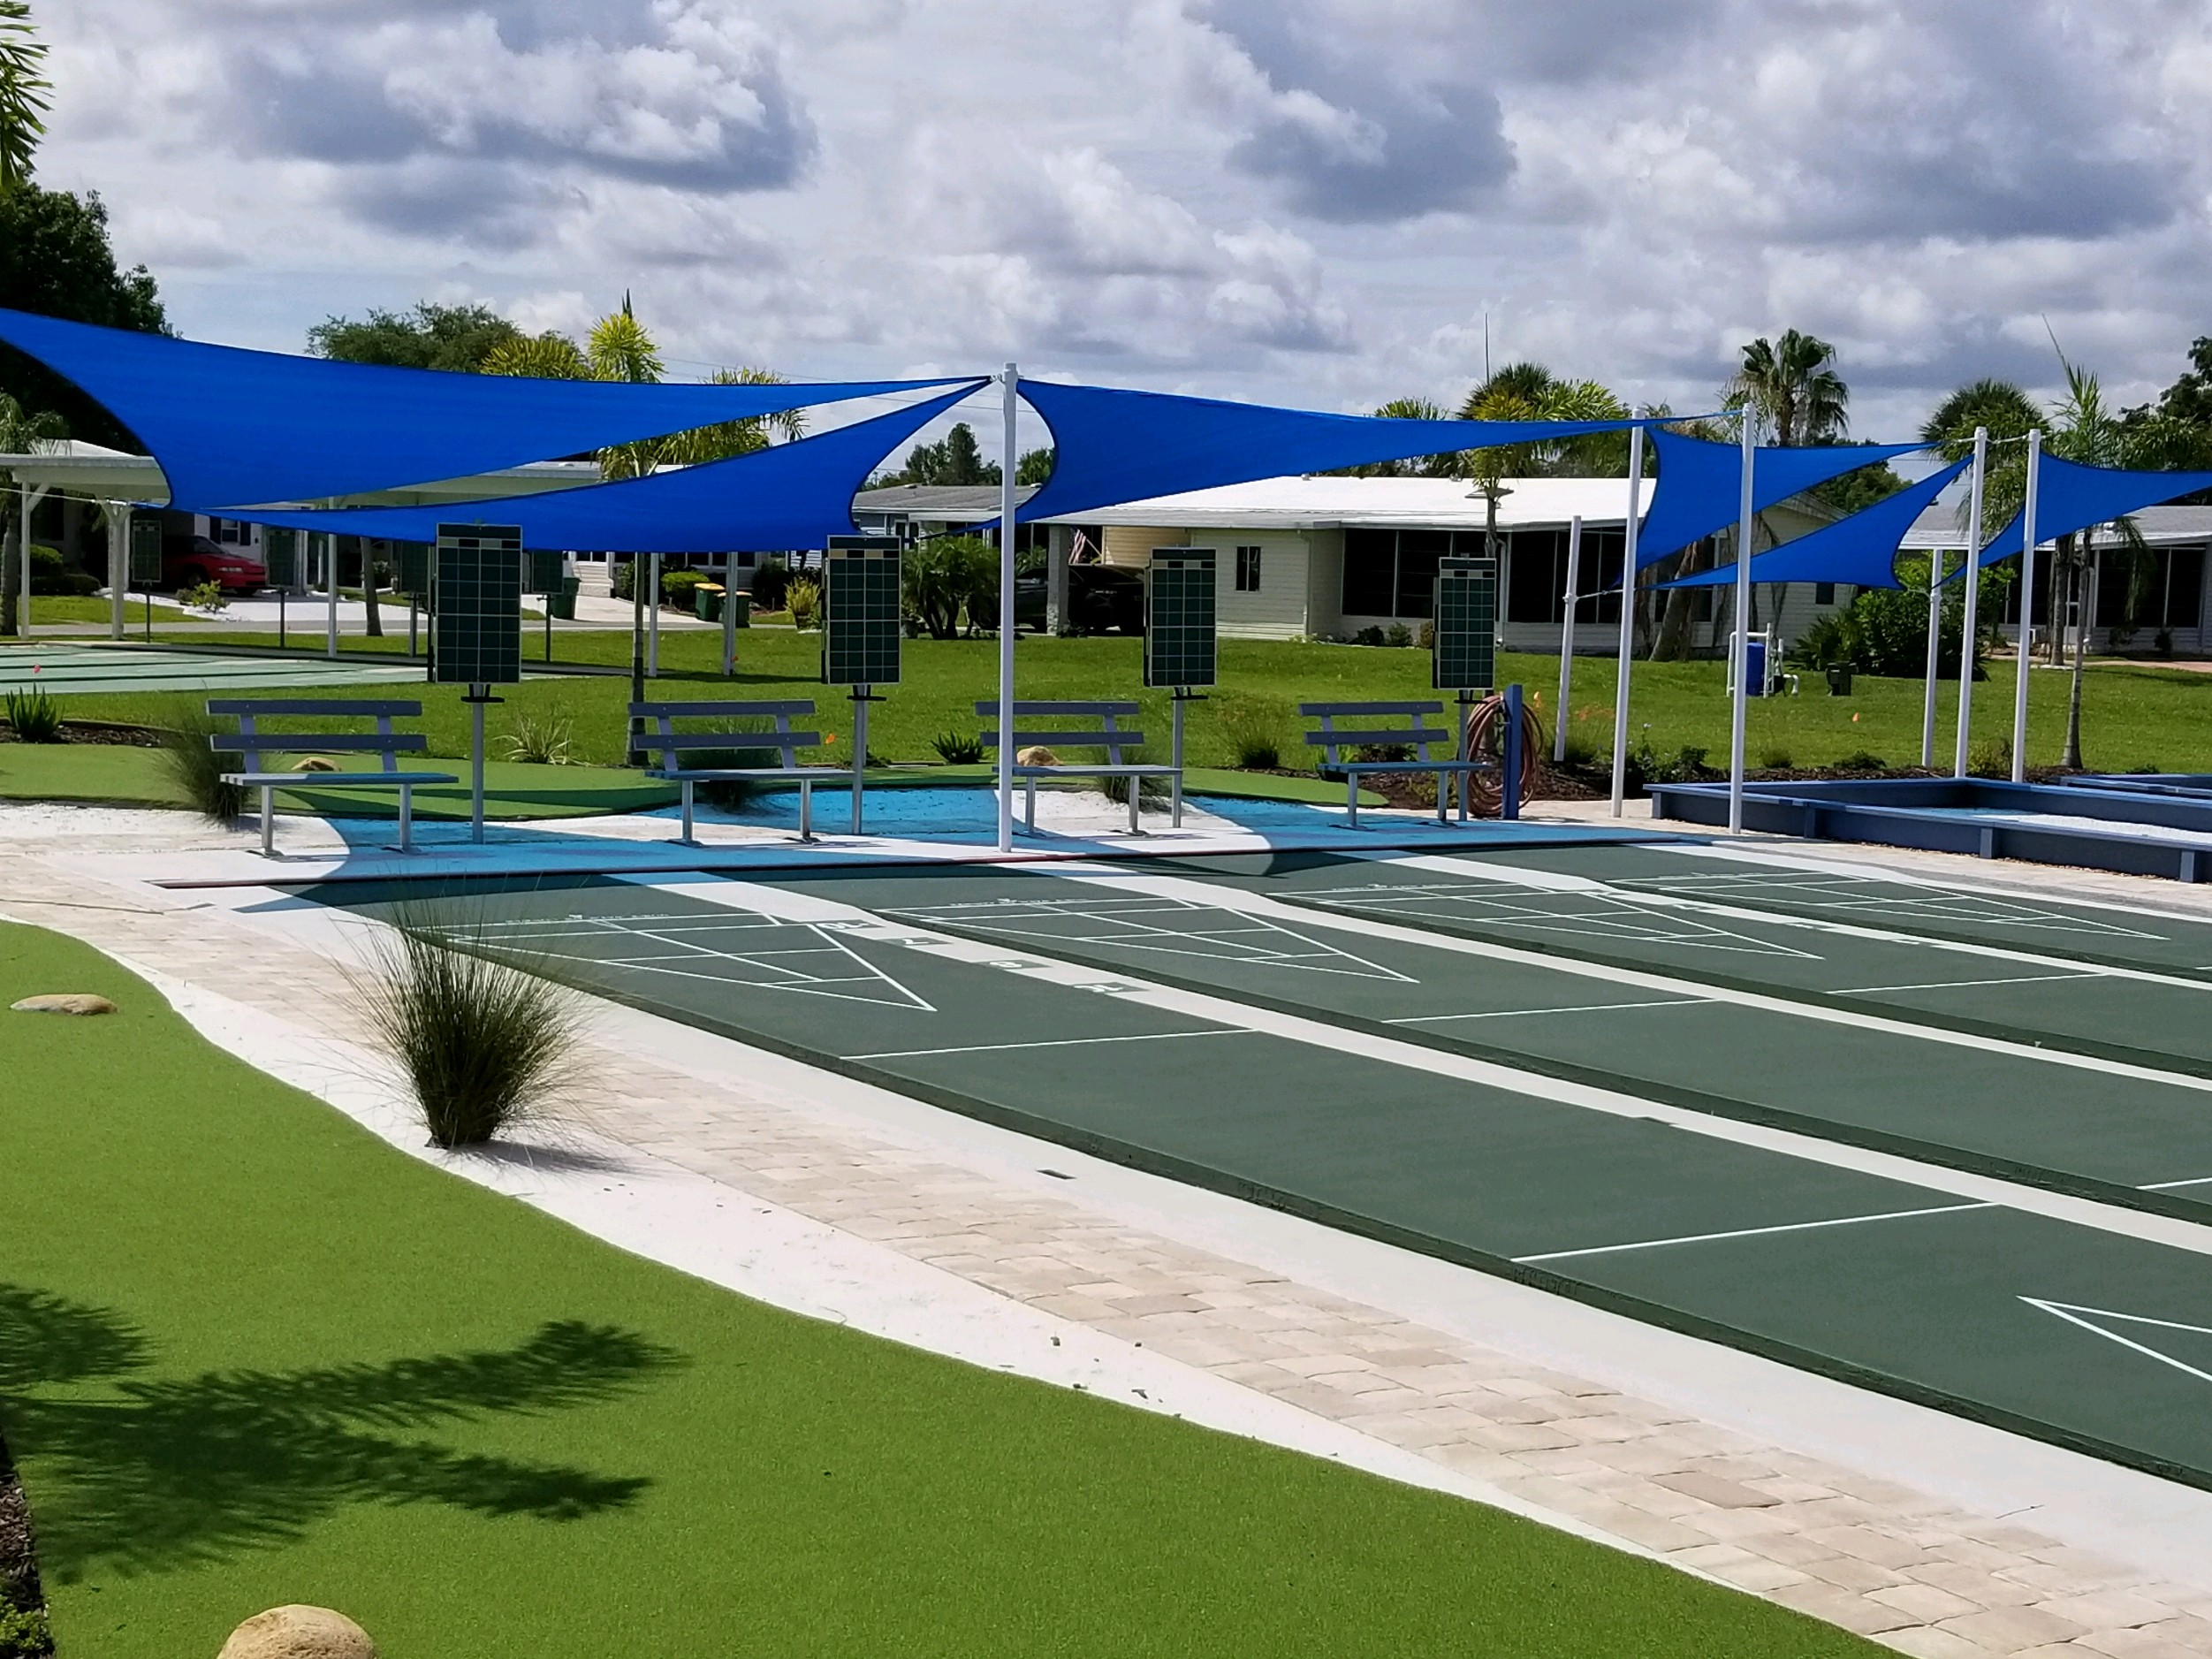 Shade Sails over Shuffkeboard Courts.jpg